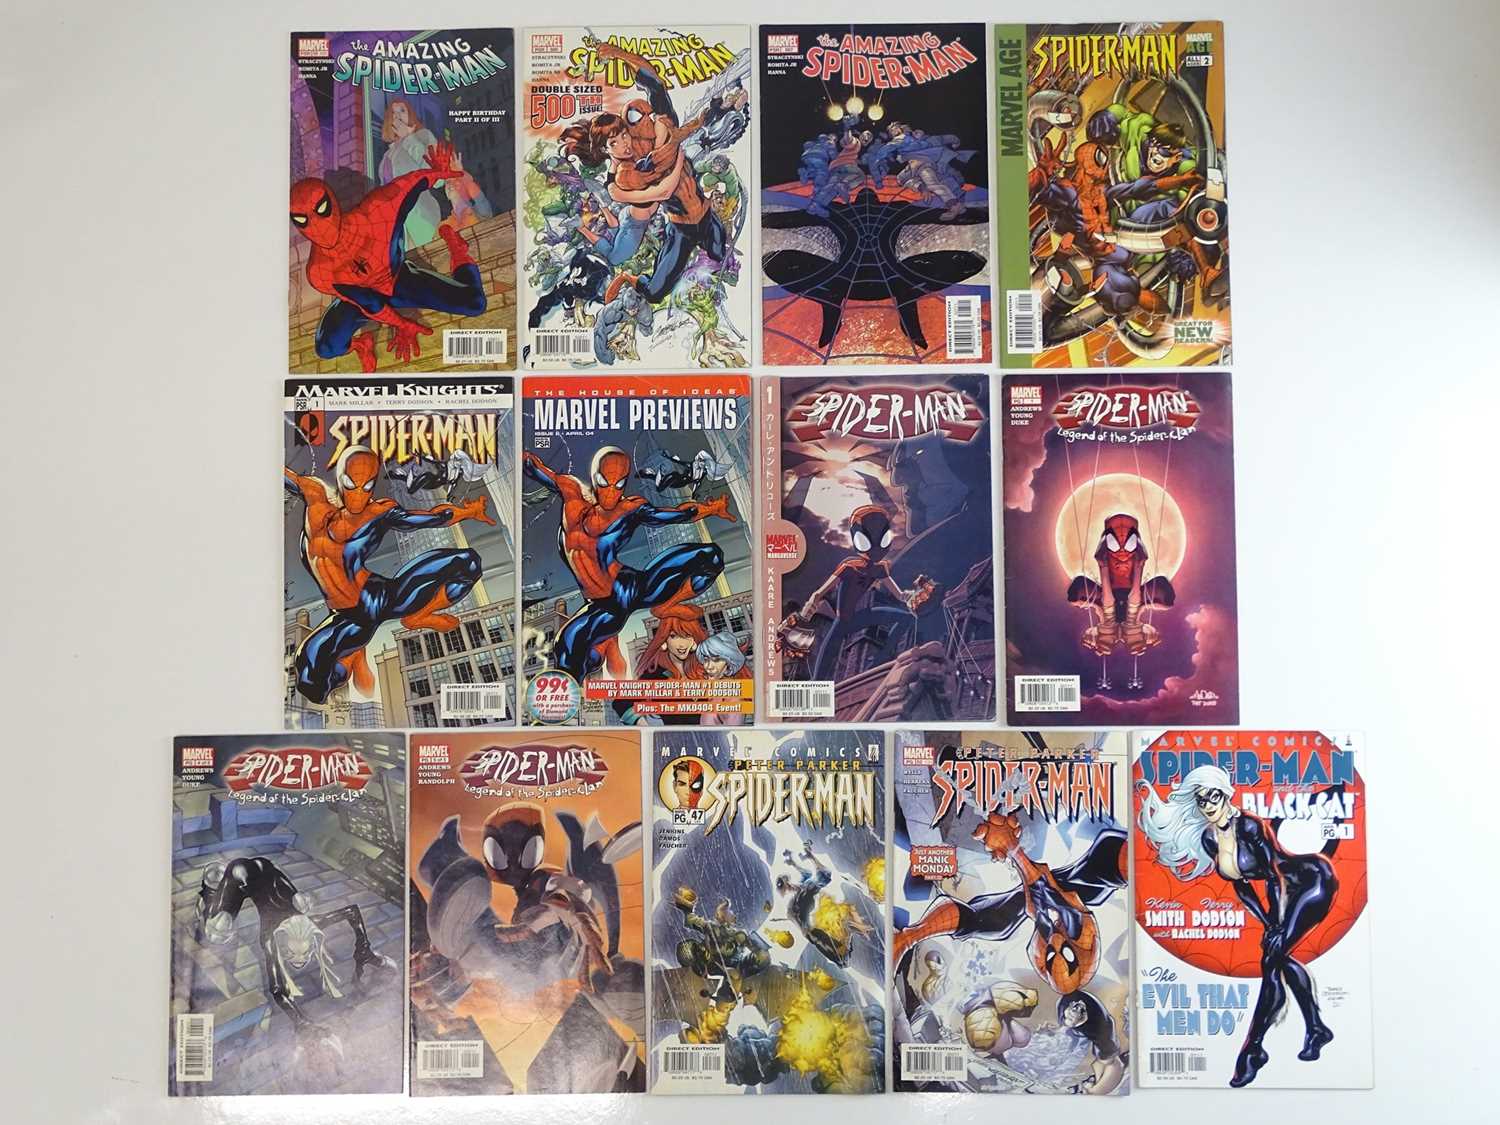 SPIDER-MAN LOT - (13 in Lot) - (2002/04 - MARVEL) - Includes AMAZING SPIDER-MAN #499, 500, 507 +